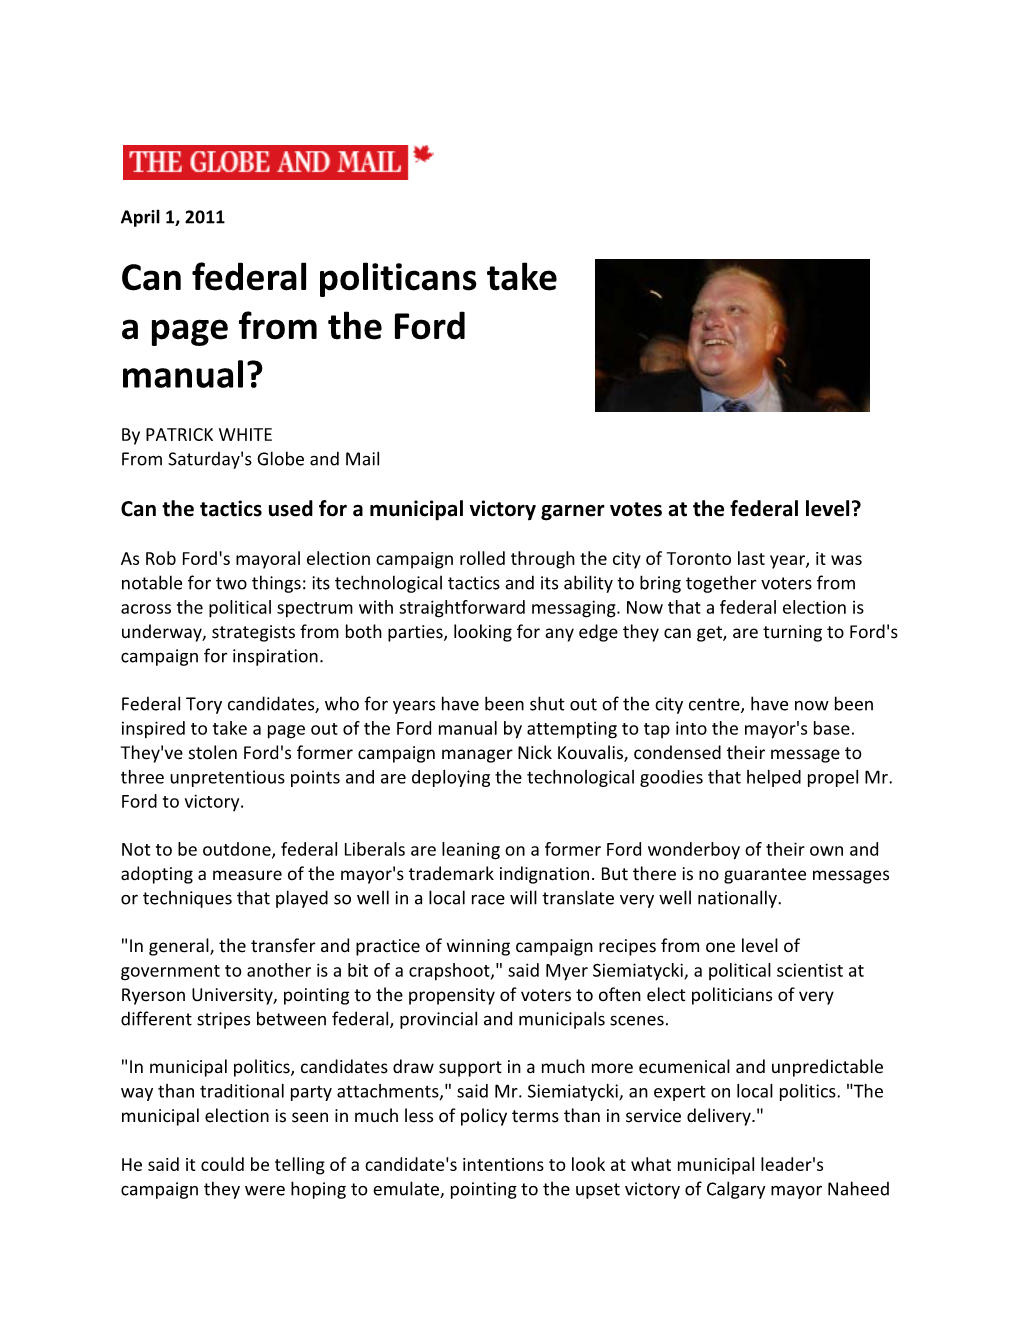 Can Federal Politicans Take a Page from the Ford Manual?